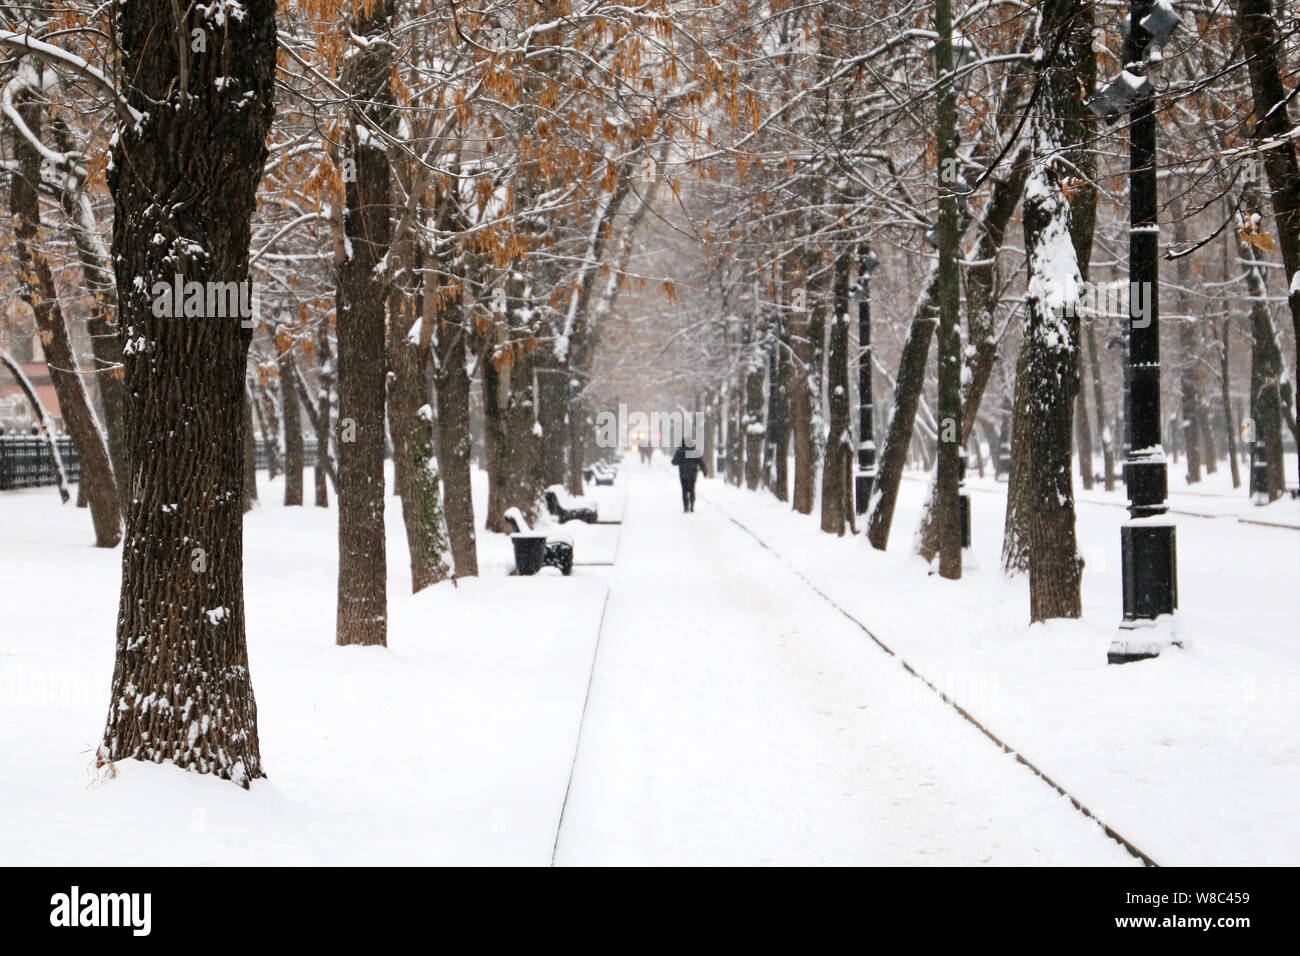 Snowfall in city park, blizzard and cold weather concept. People walking on a snowy walkway in winter, trees with dry leaves are covered with snow Stock Photo